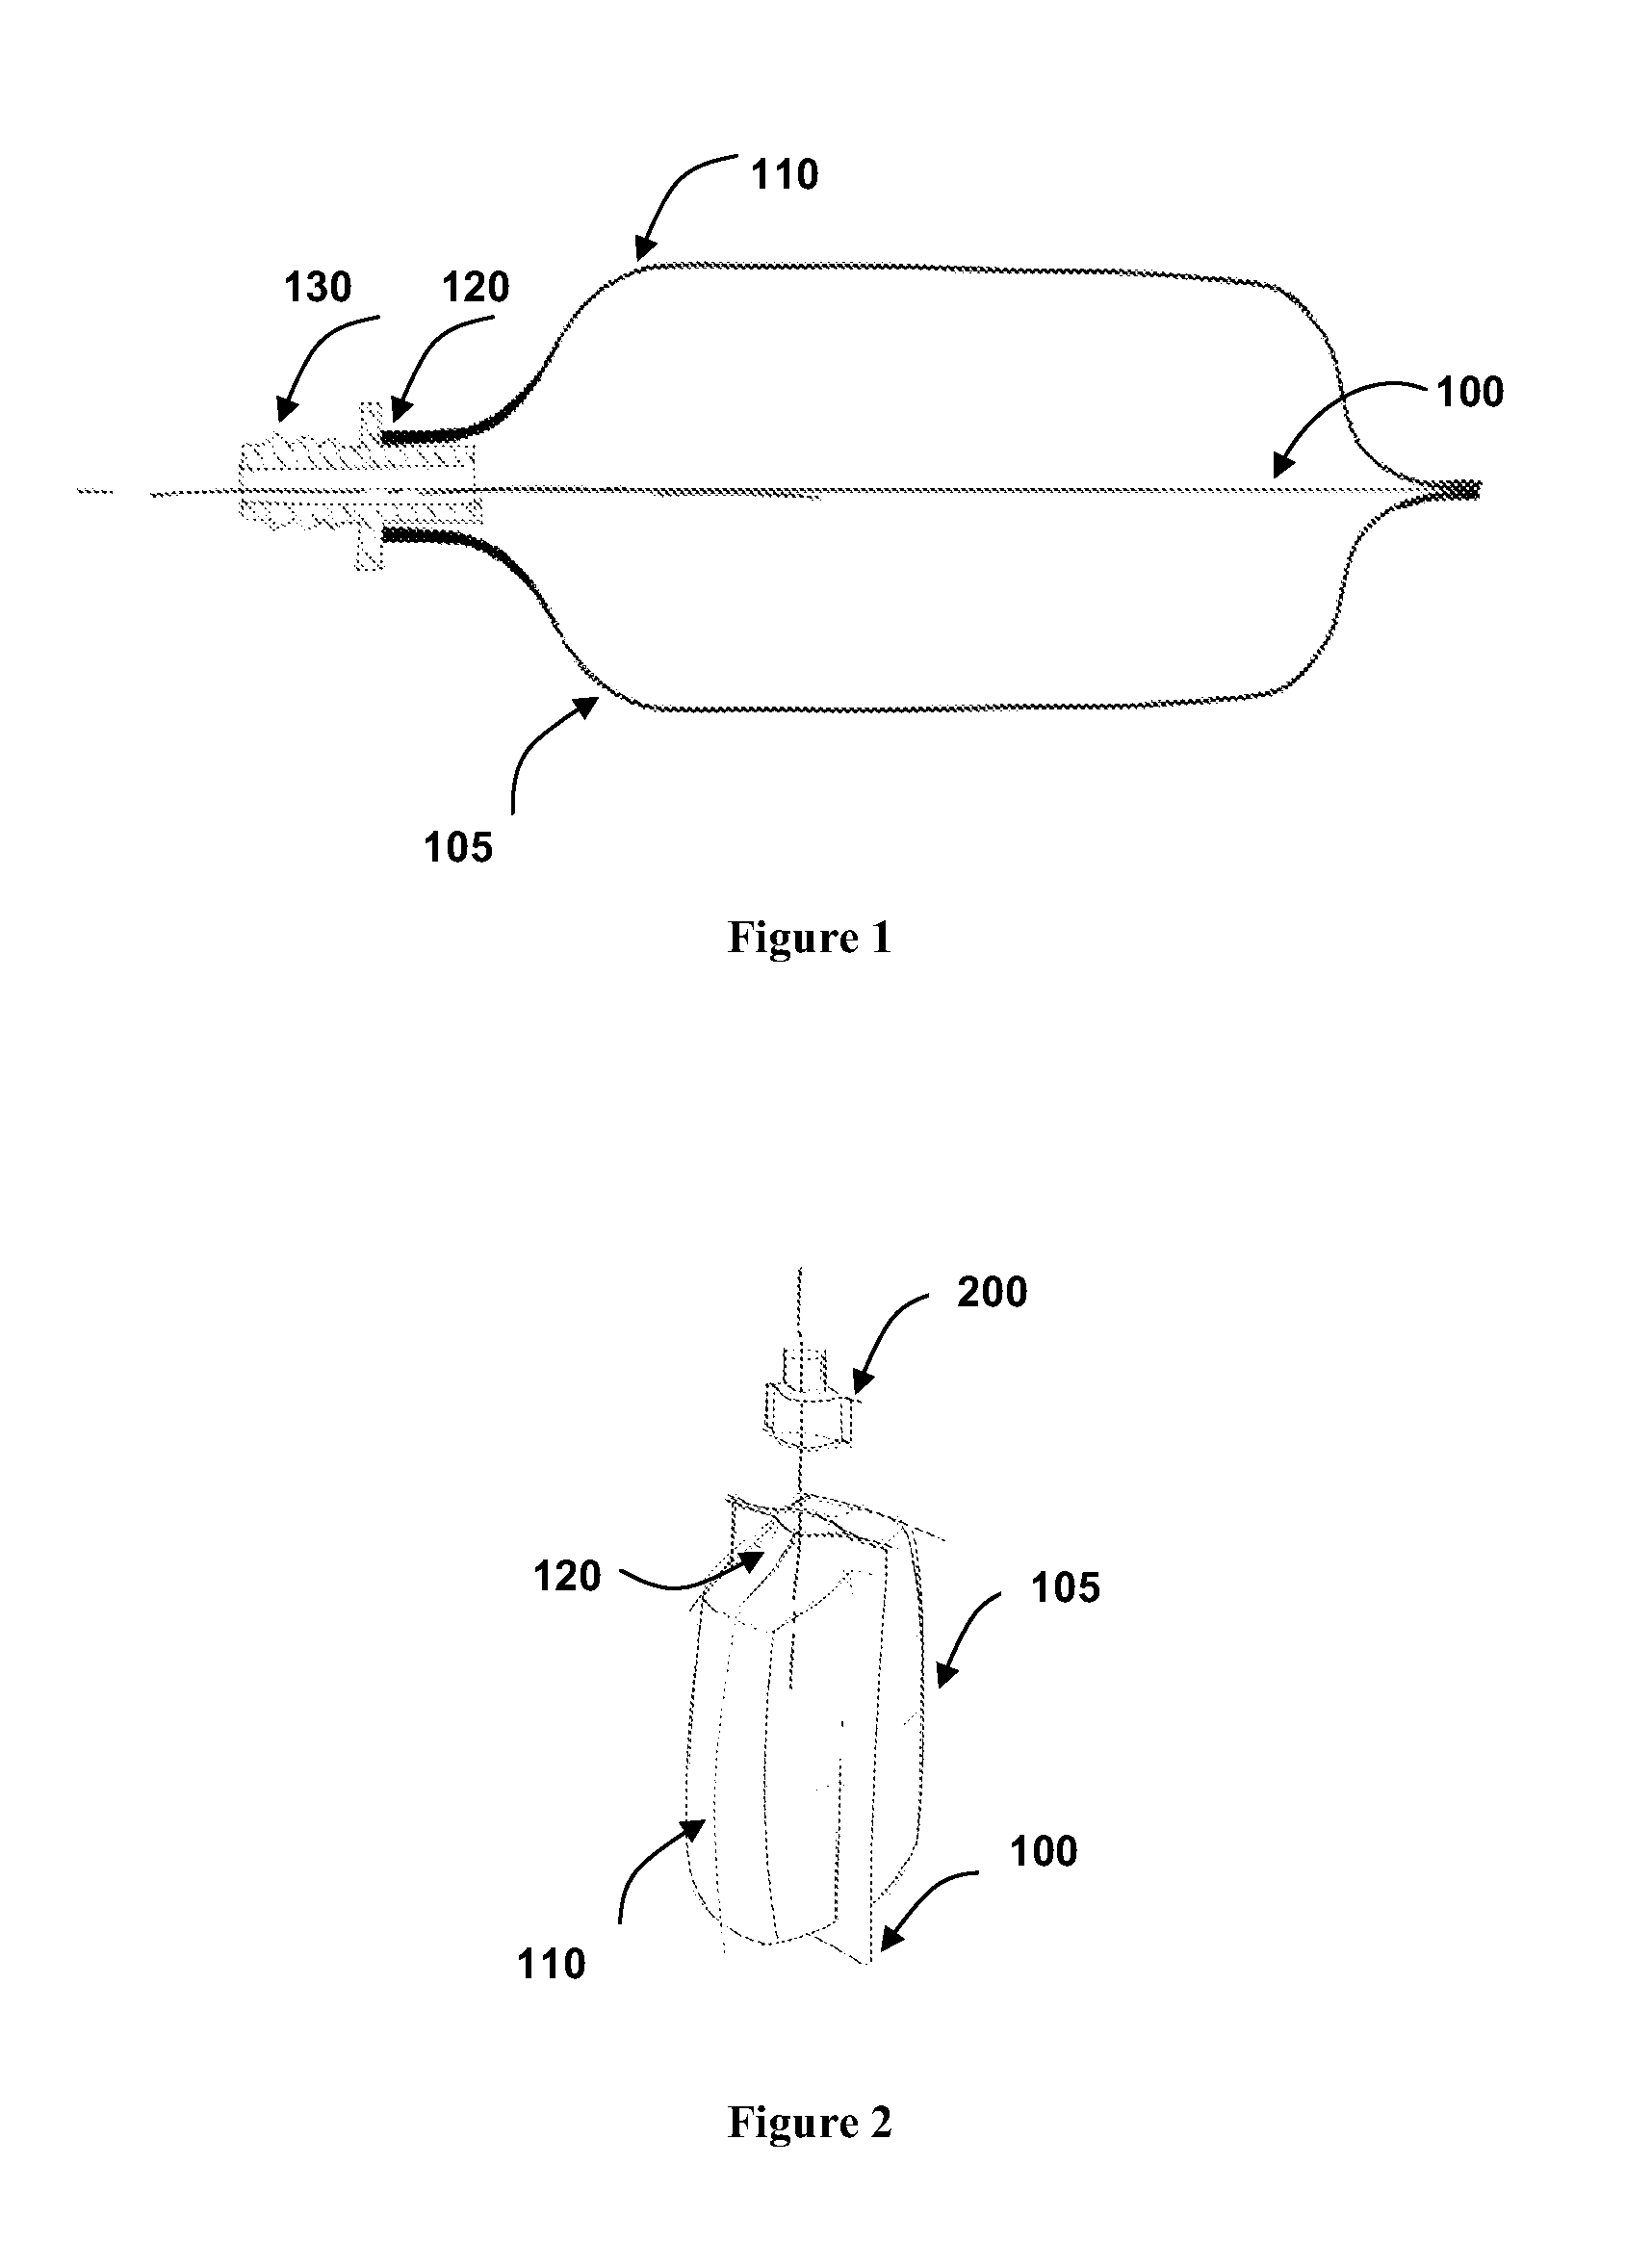 Thermoformed liquid-holding vessels